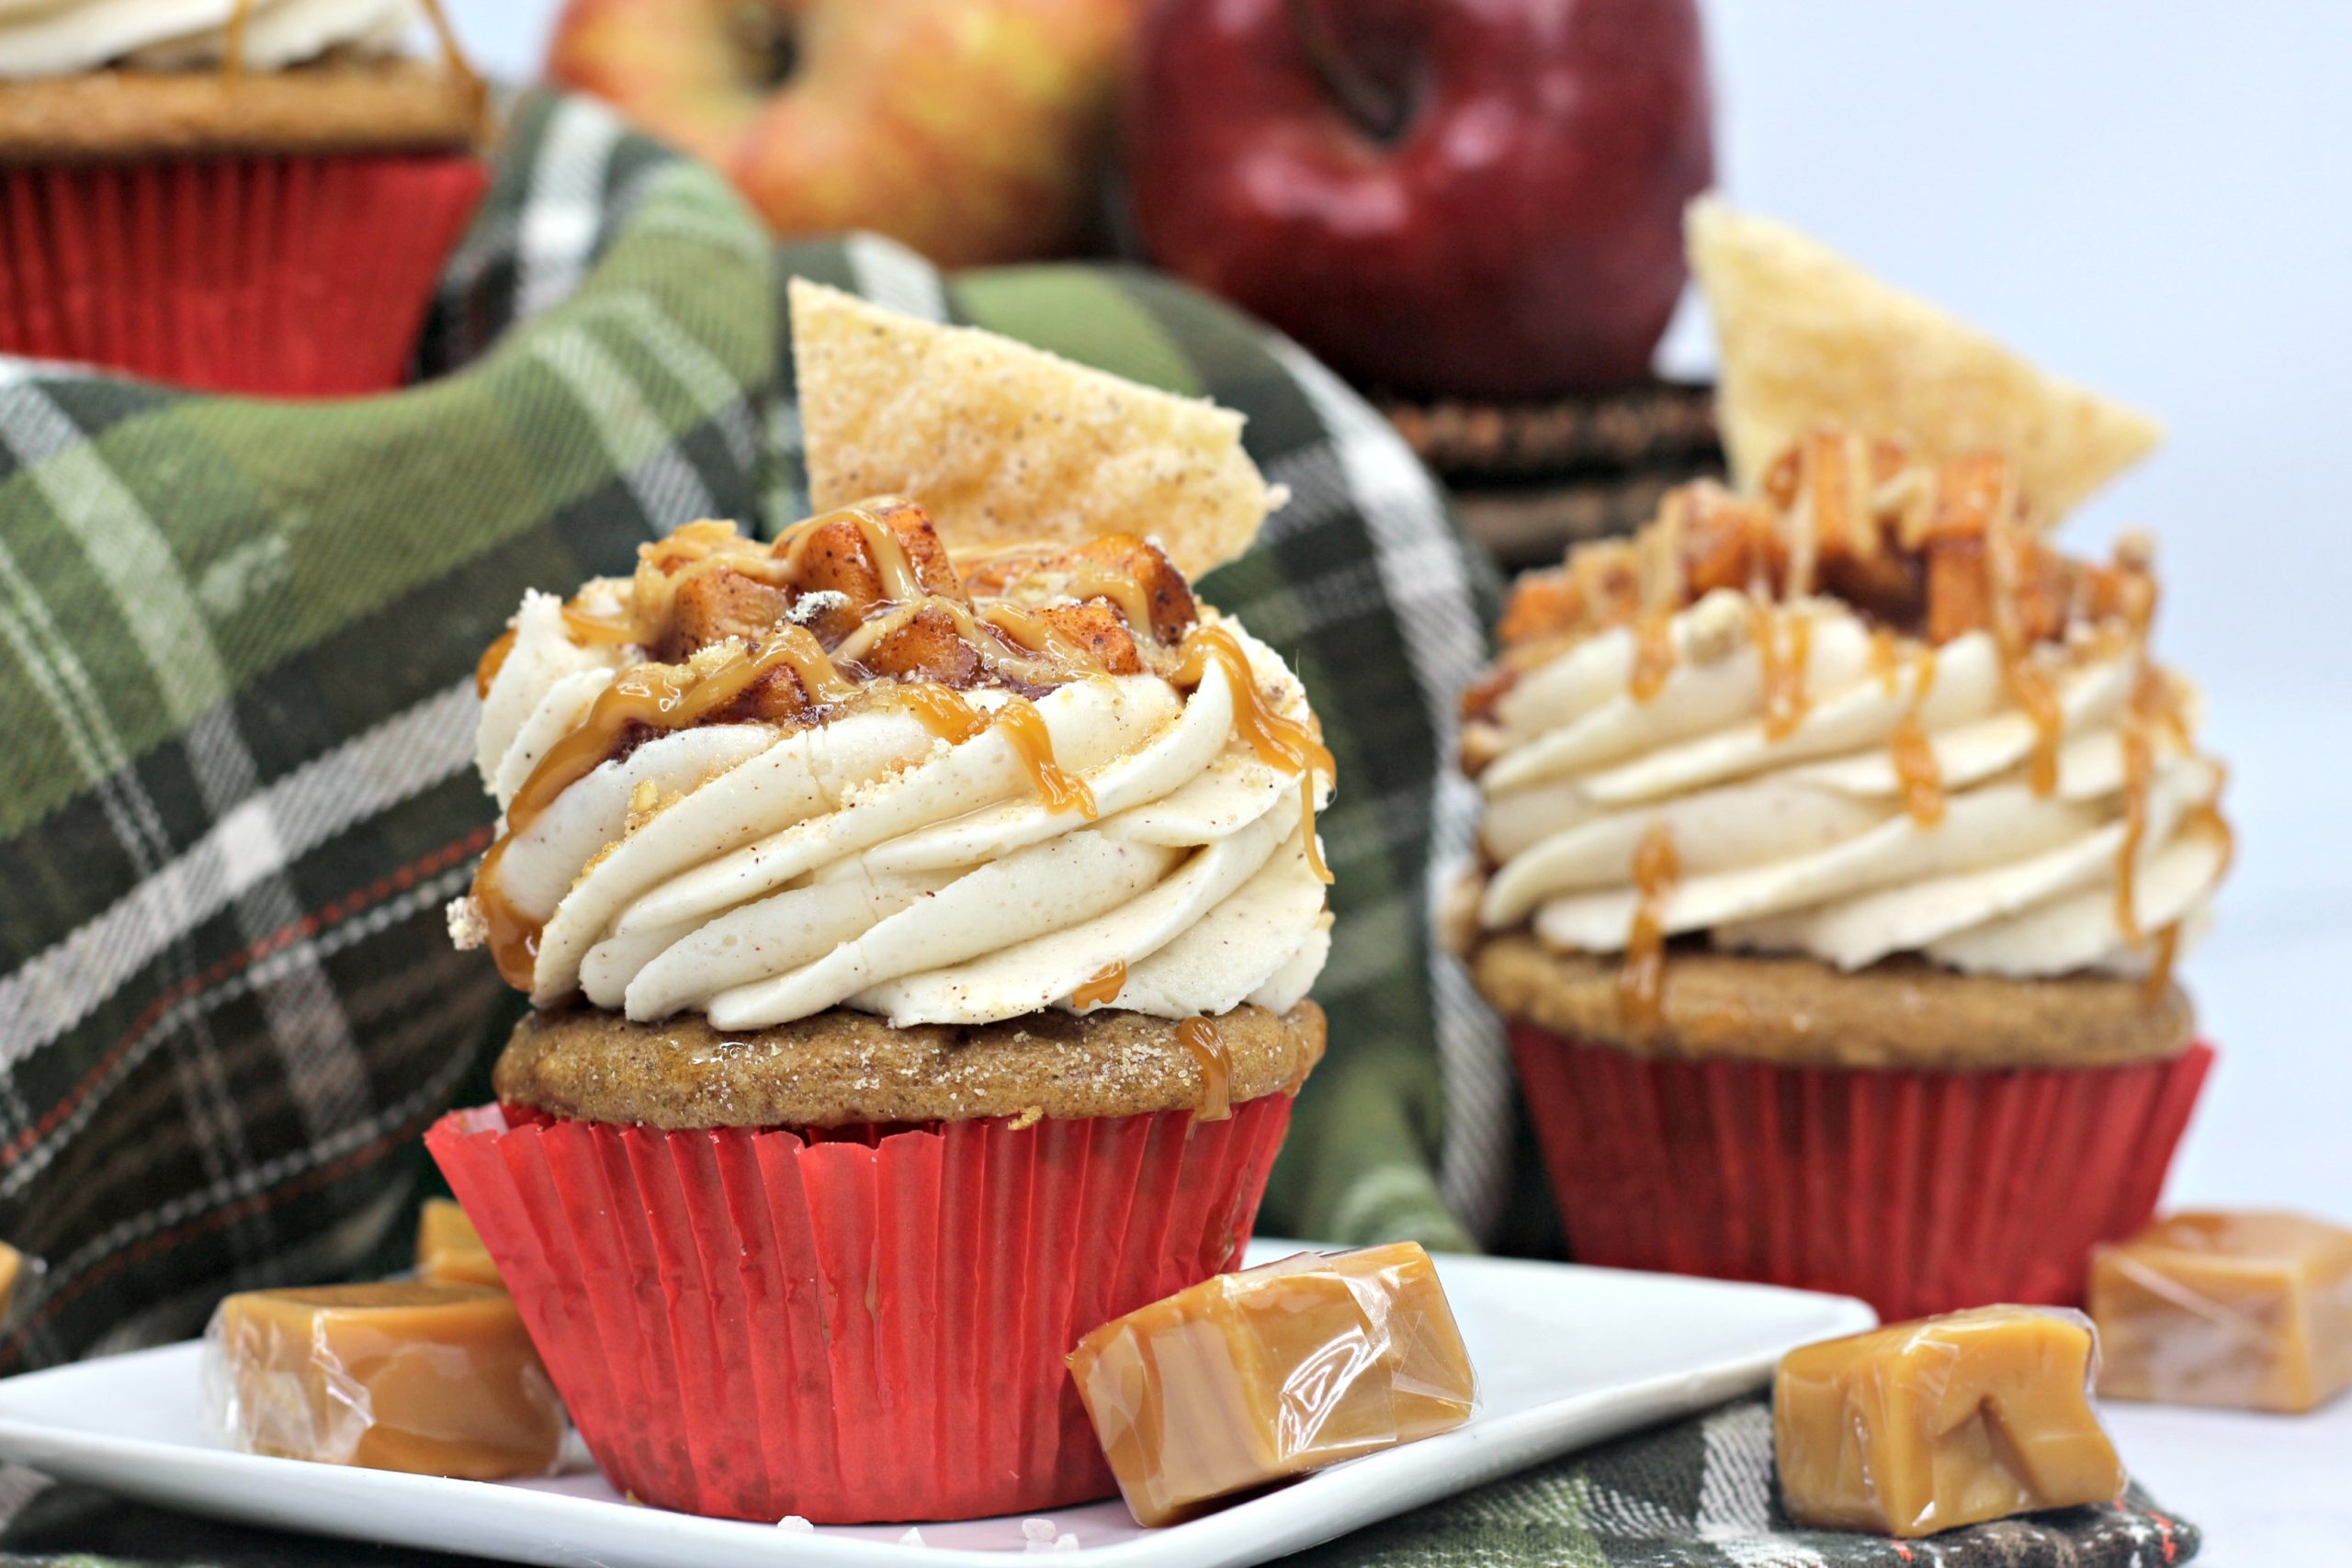 One of the Apple Pie Cupcakes on a white and square serving plate.